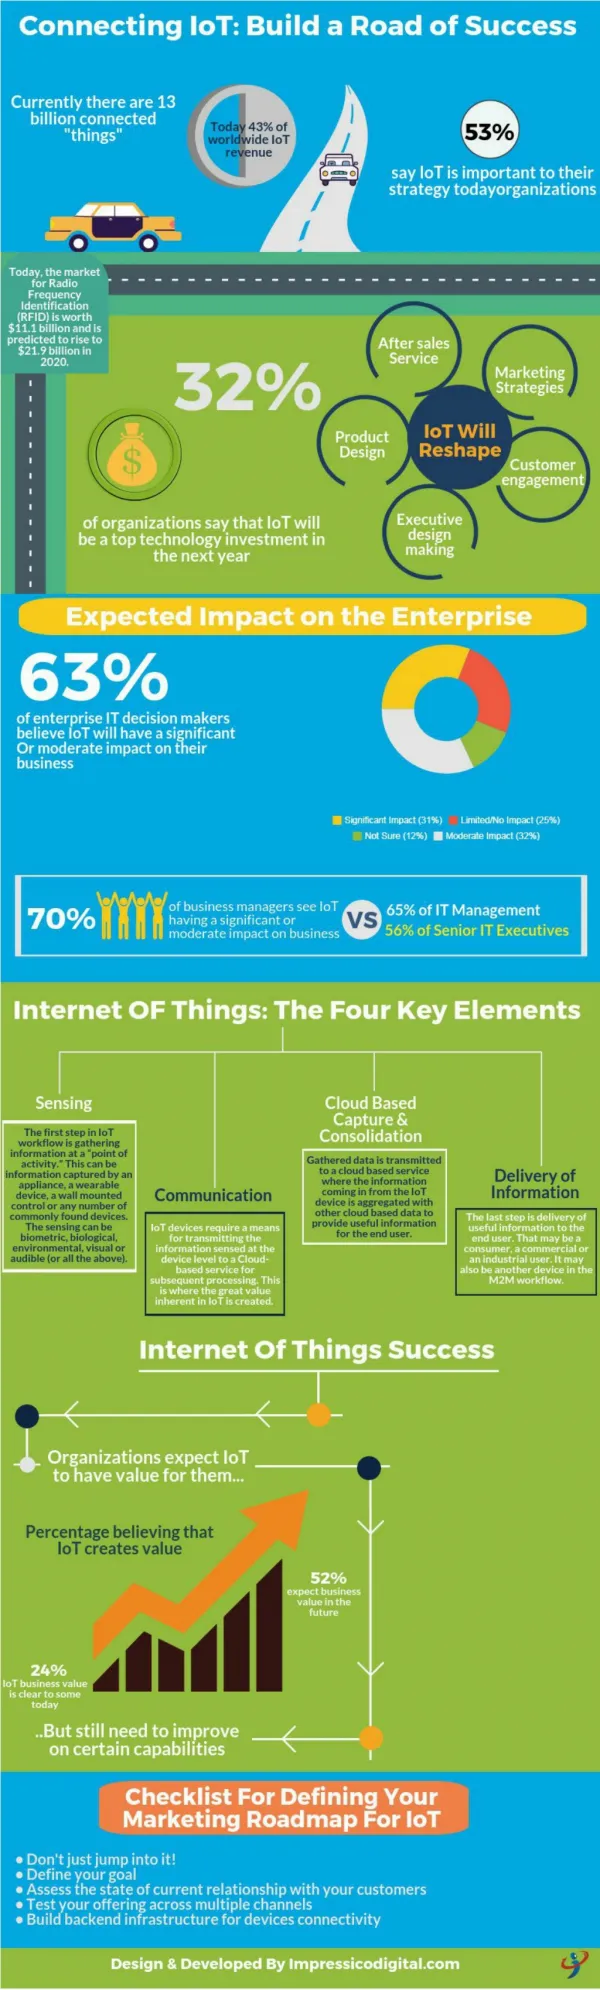 Internet of Things: Four Key Elements You Need To Know